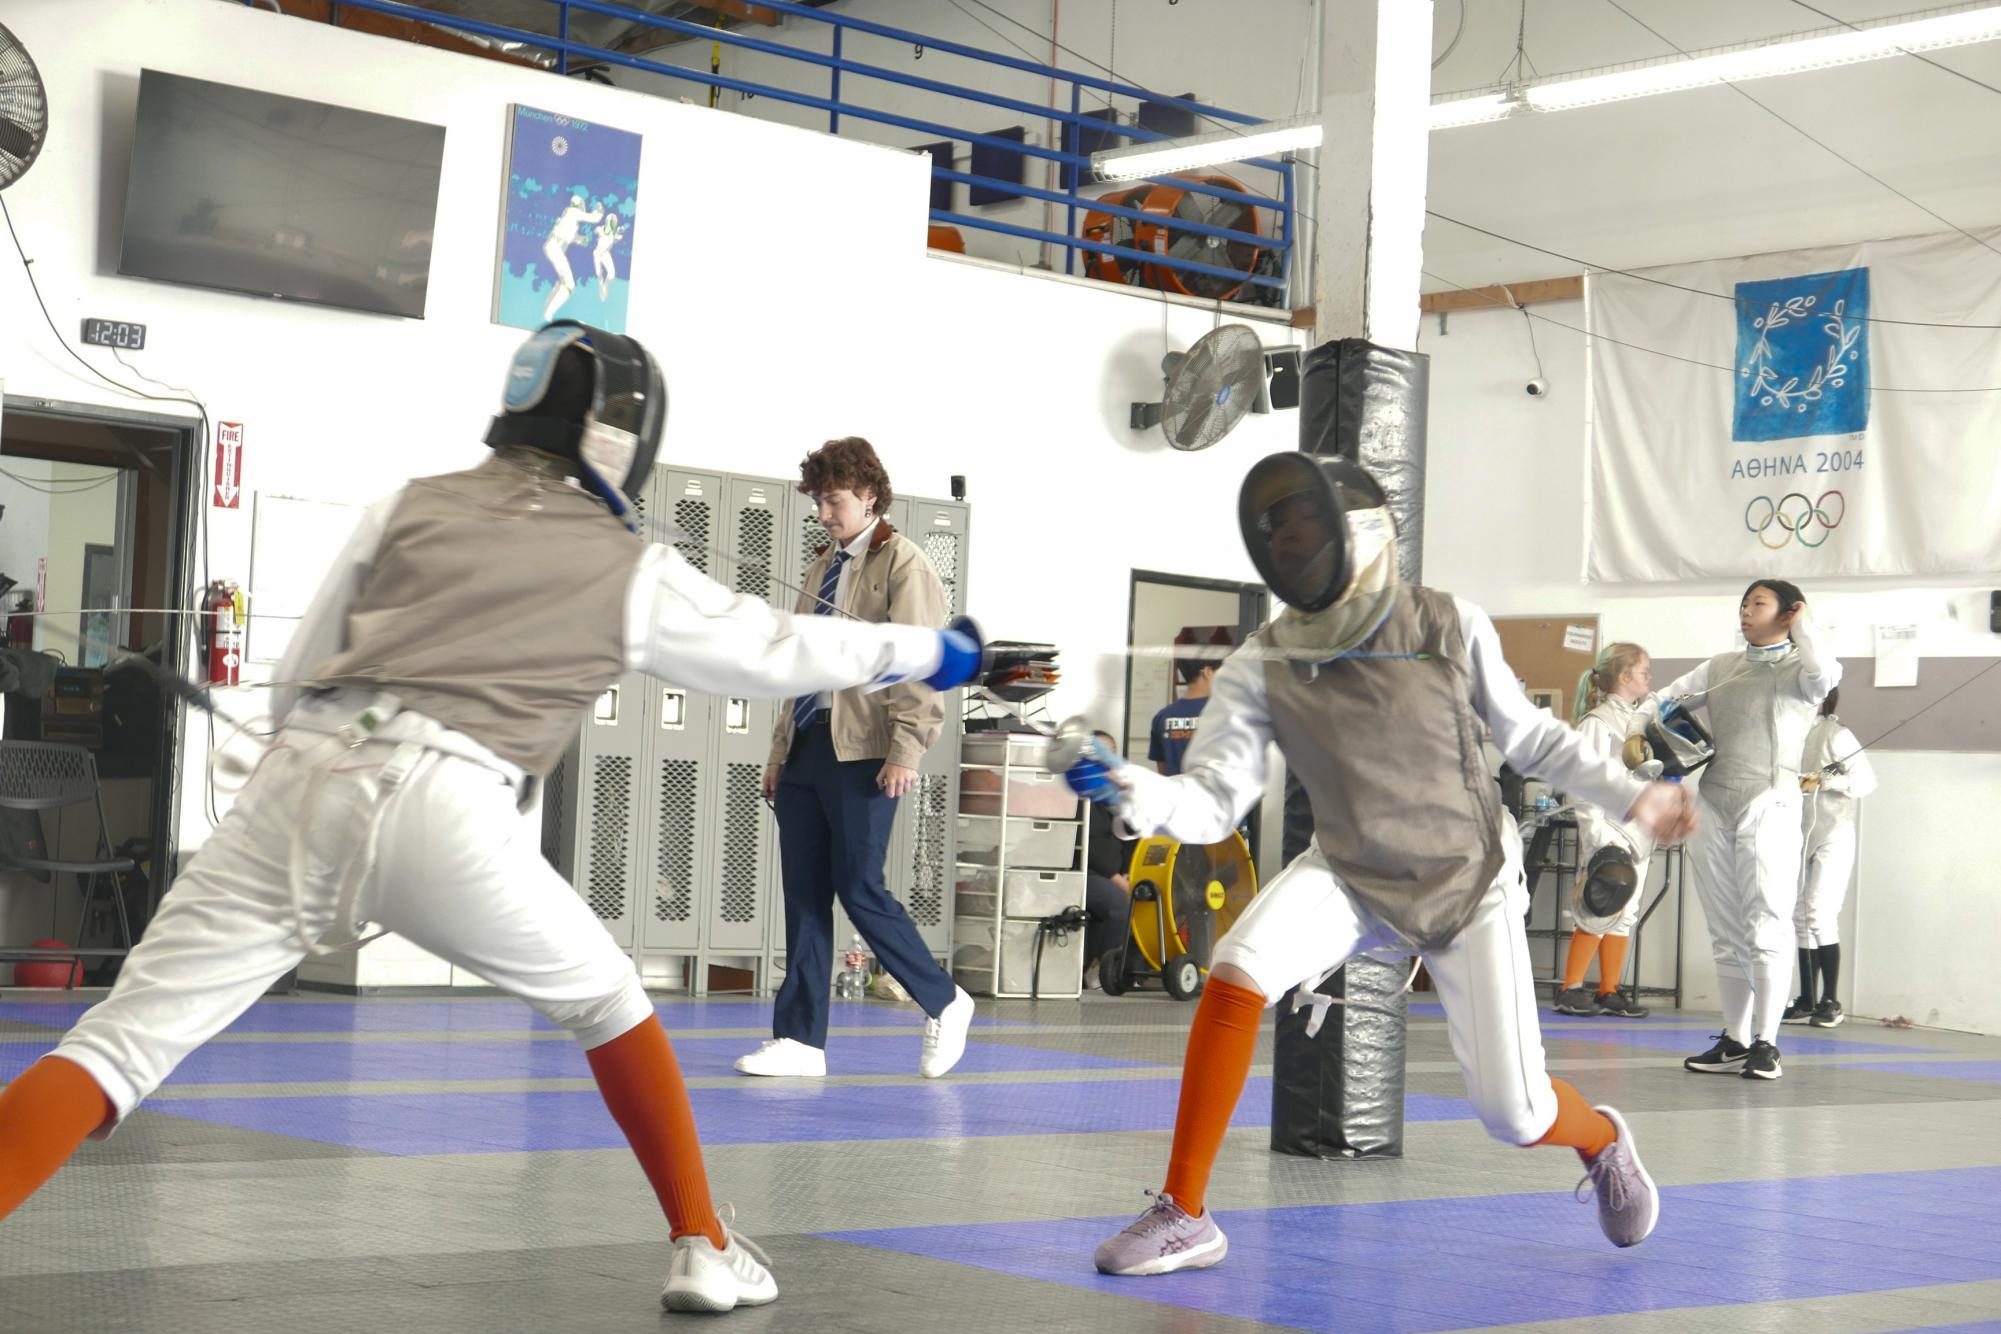 Poly’s Fencing Team Triumphs in Winter Season Tournament Victories